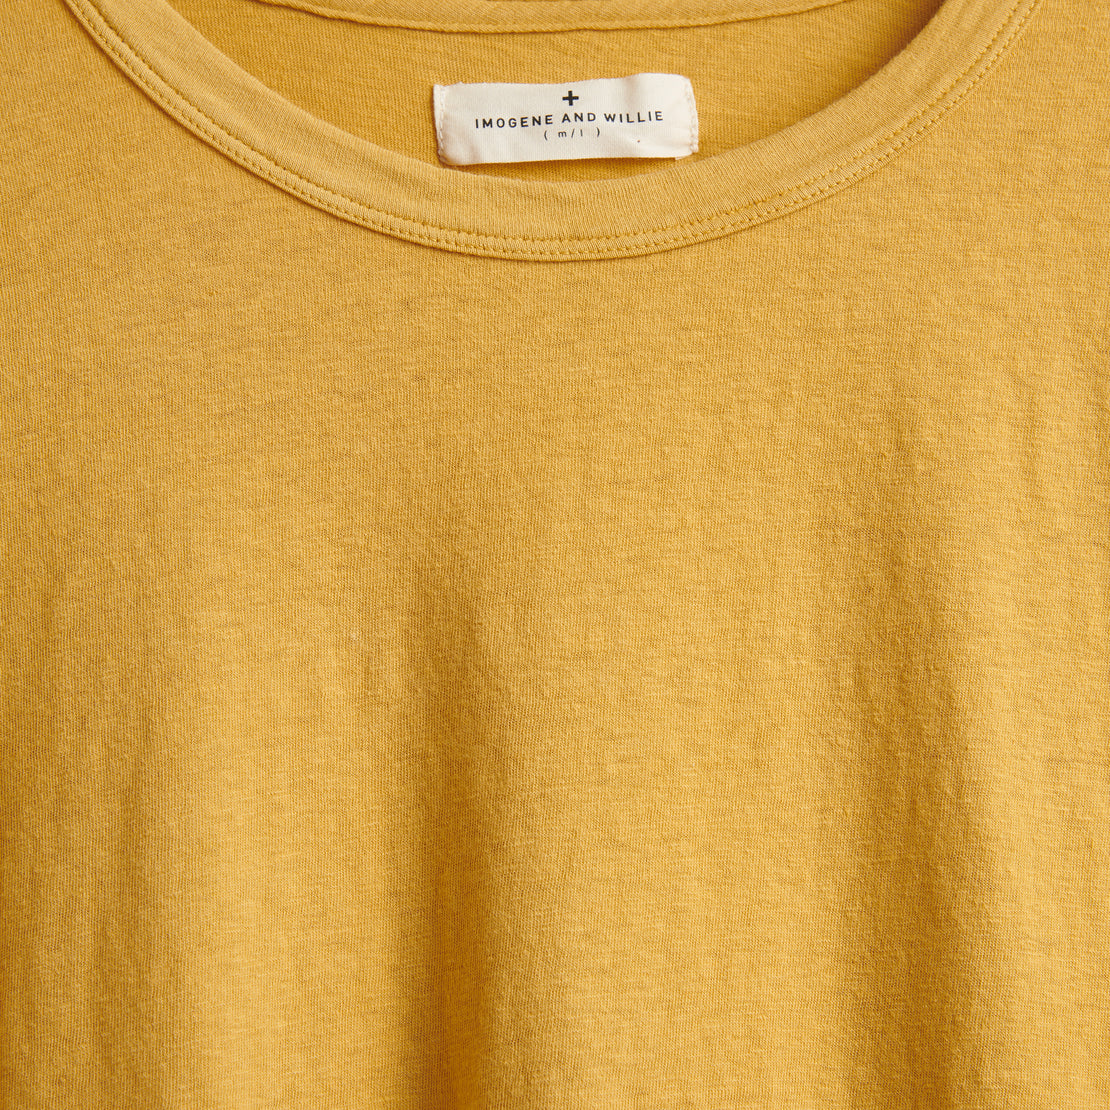 Drop Tee - Mustard - Imogene + Willie - STAG Provisions - W - Tops - S/S Tee